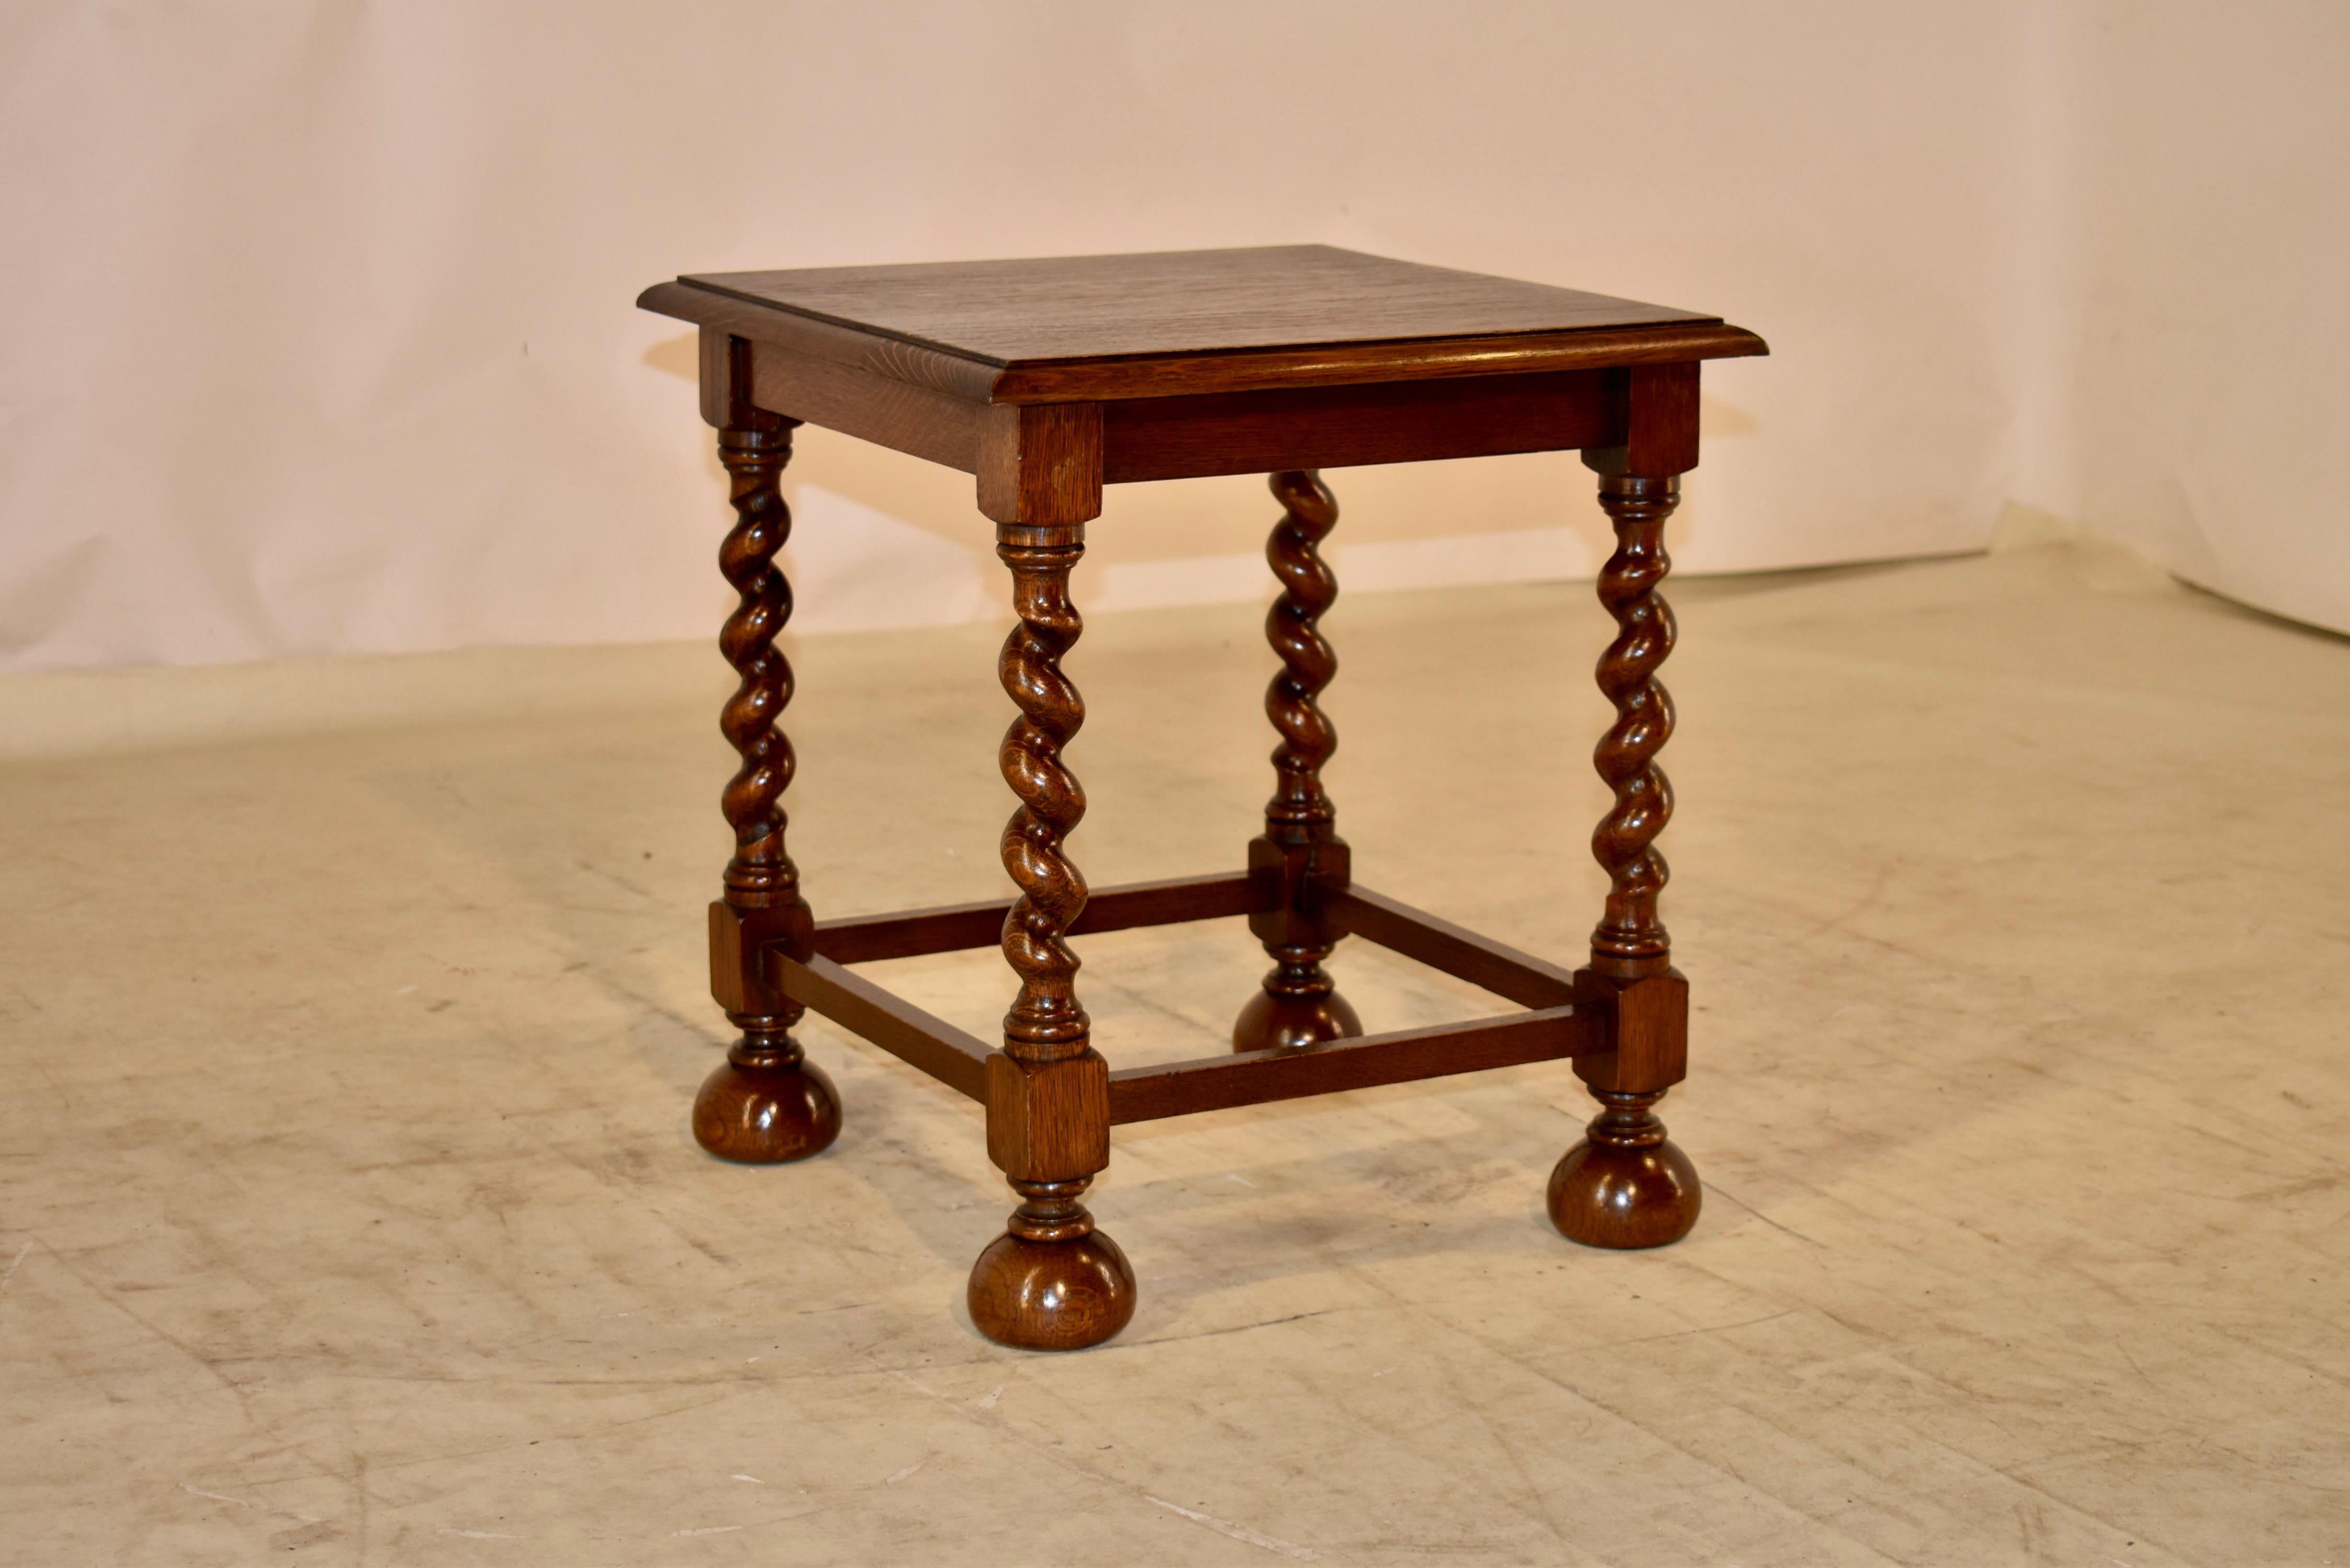 Late 19th century oak cocktail or end table from England. The top has a beveled edge, following down to a simple apron and wonderful and thickly hand turned barley twist legs. The legs have been joined by simple stretchers and are supported on large